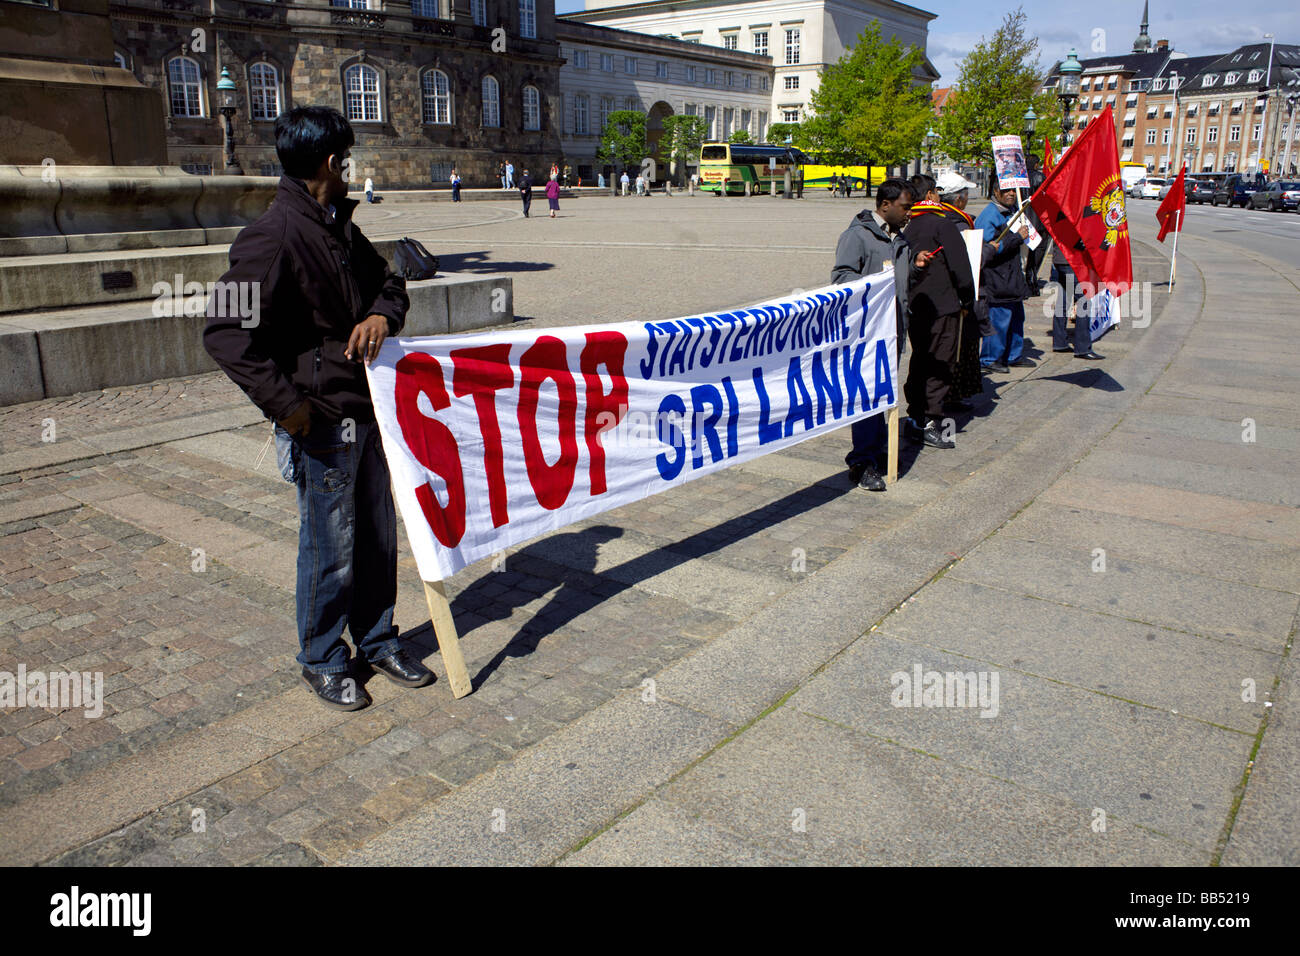 people holding placards at a 'Stop state terrorism in Sri Lanka' political protest outside the Christiansborg Palace, Copenhagen Stock Photo